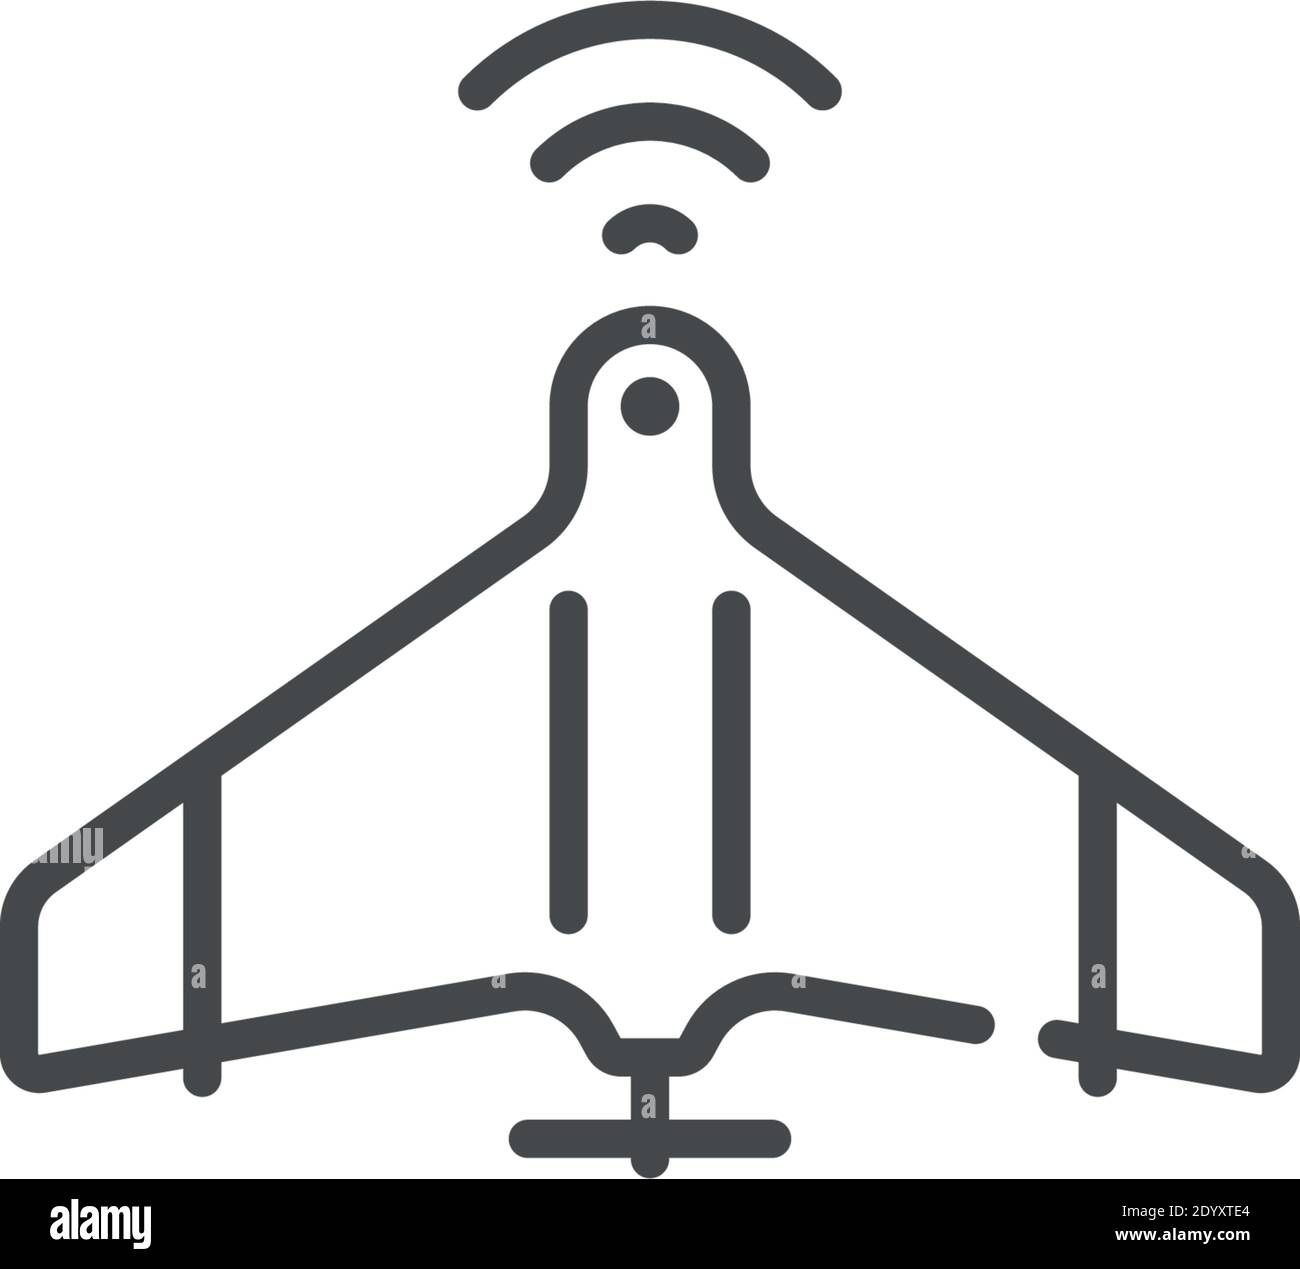 unmanned aerial vehicle vector icon modern simple vector illustration Stock Vector